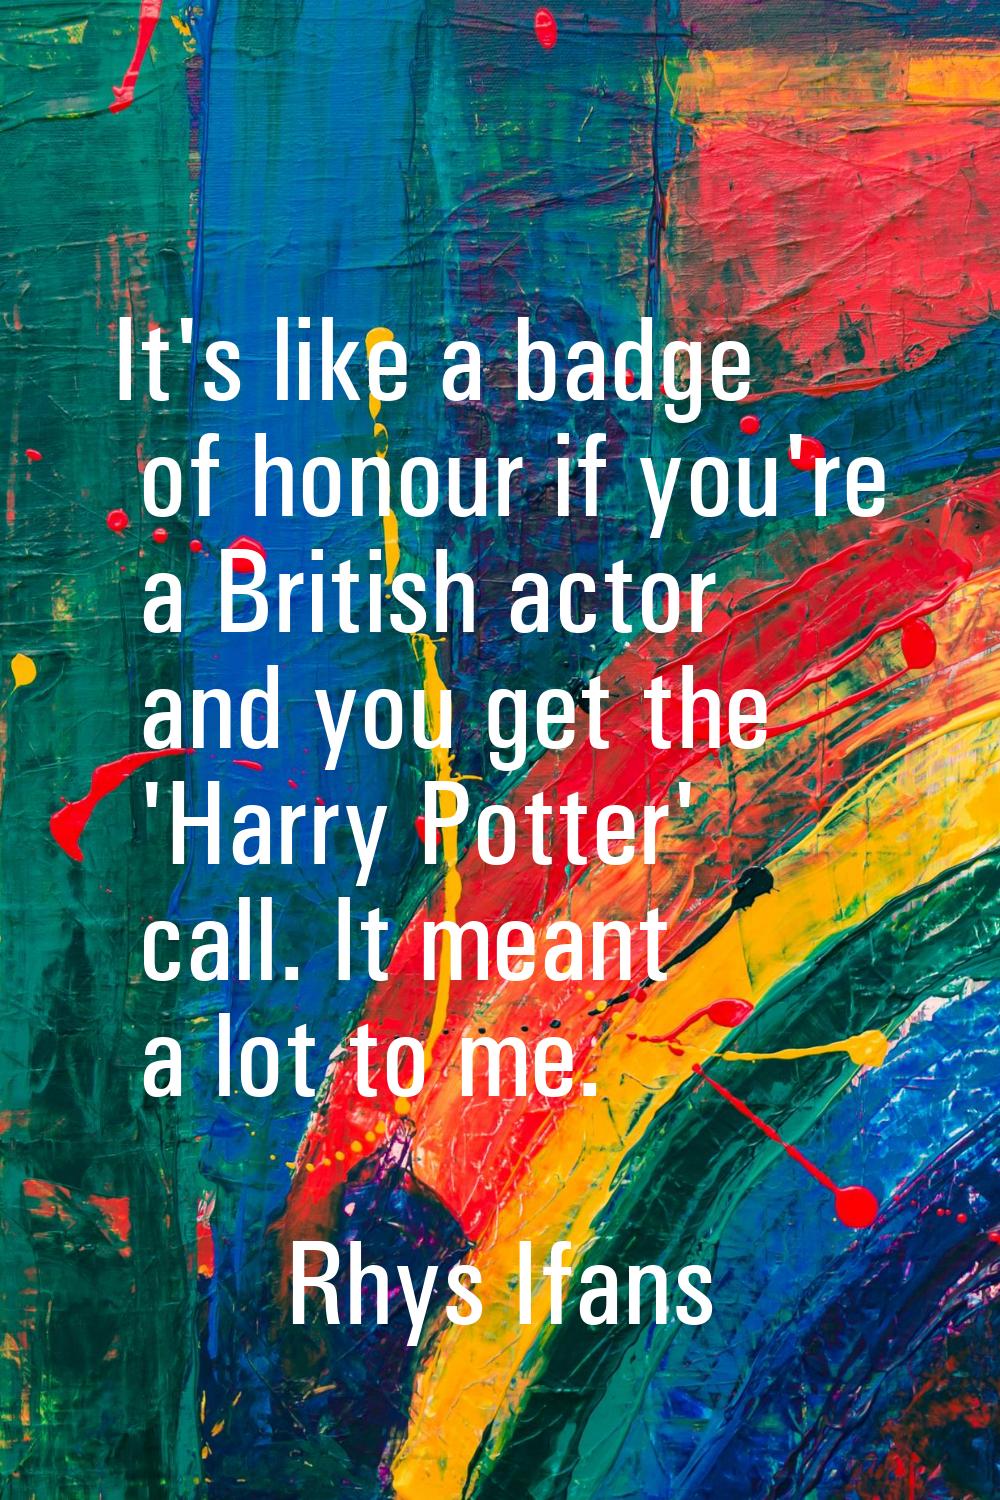 It's like a badge of honour if you're a British actor and you get the 'Harry Potter' call. It meant